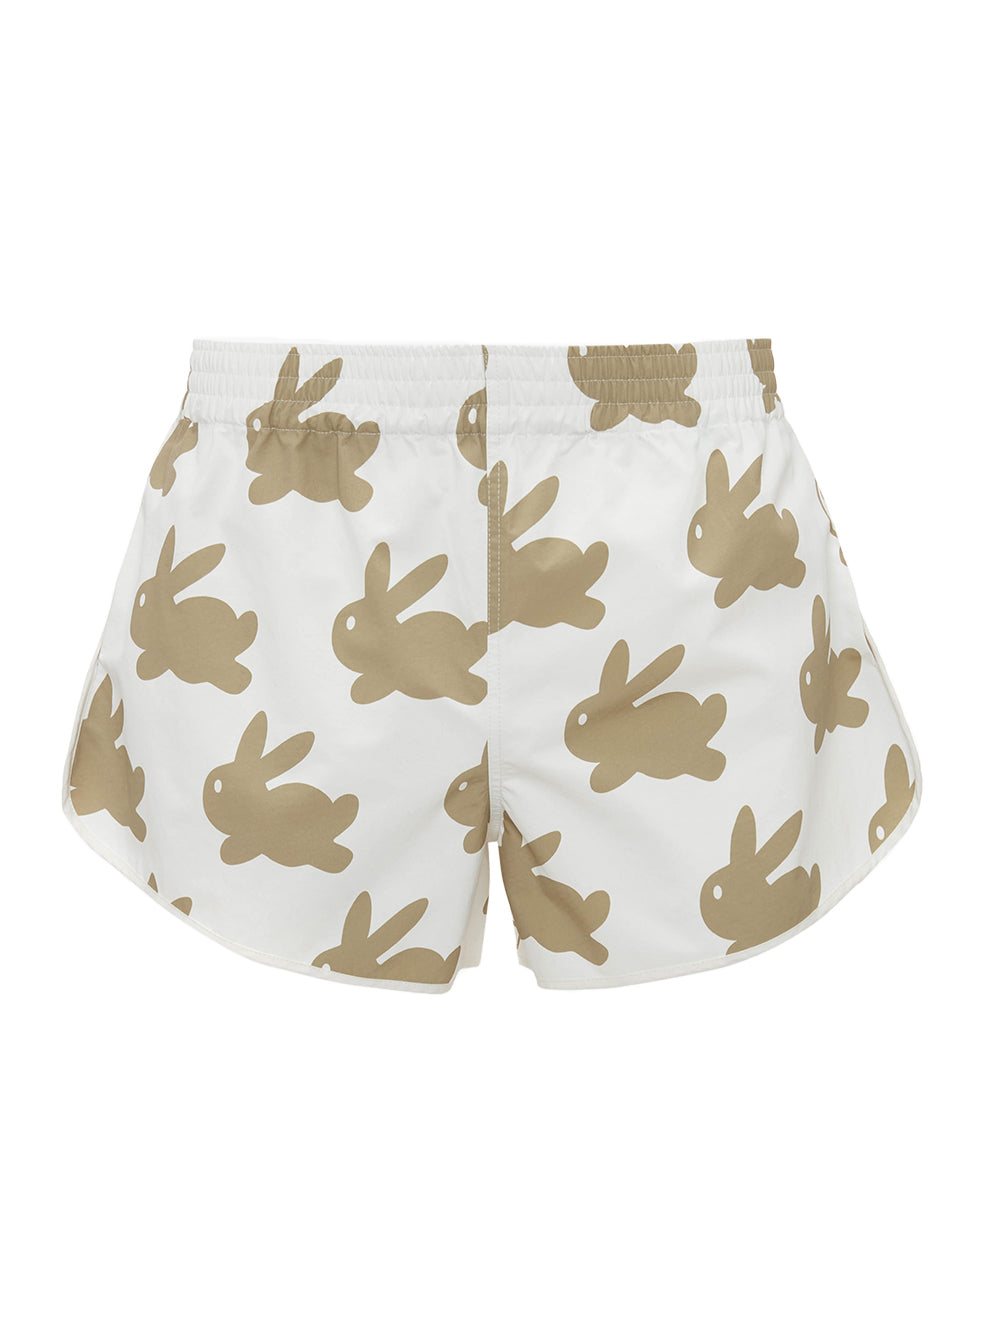 JW Anderson All Over Bunny Running Shorts (White/Ivory)